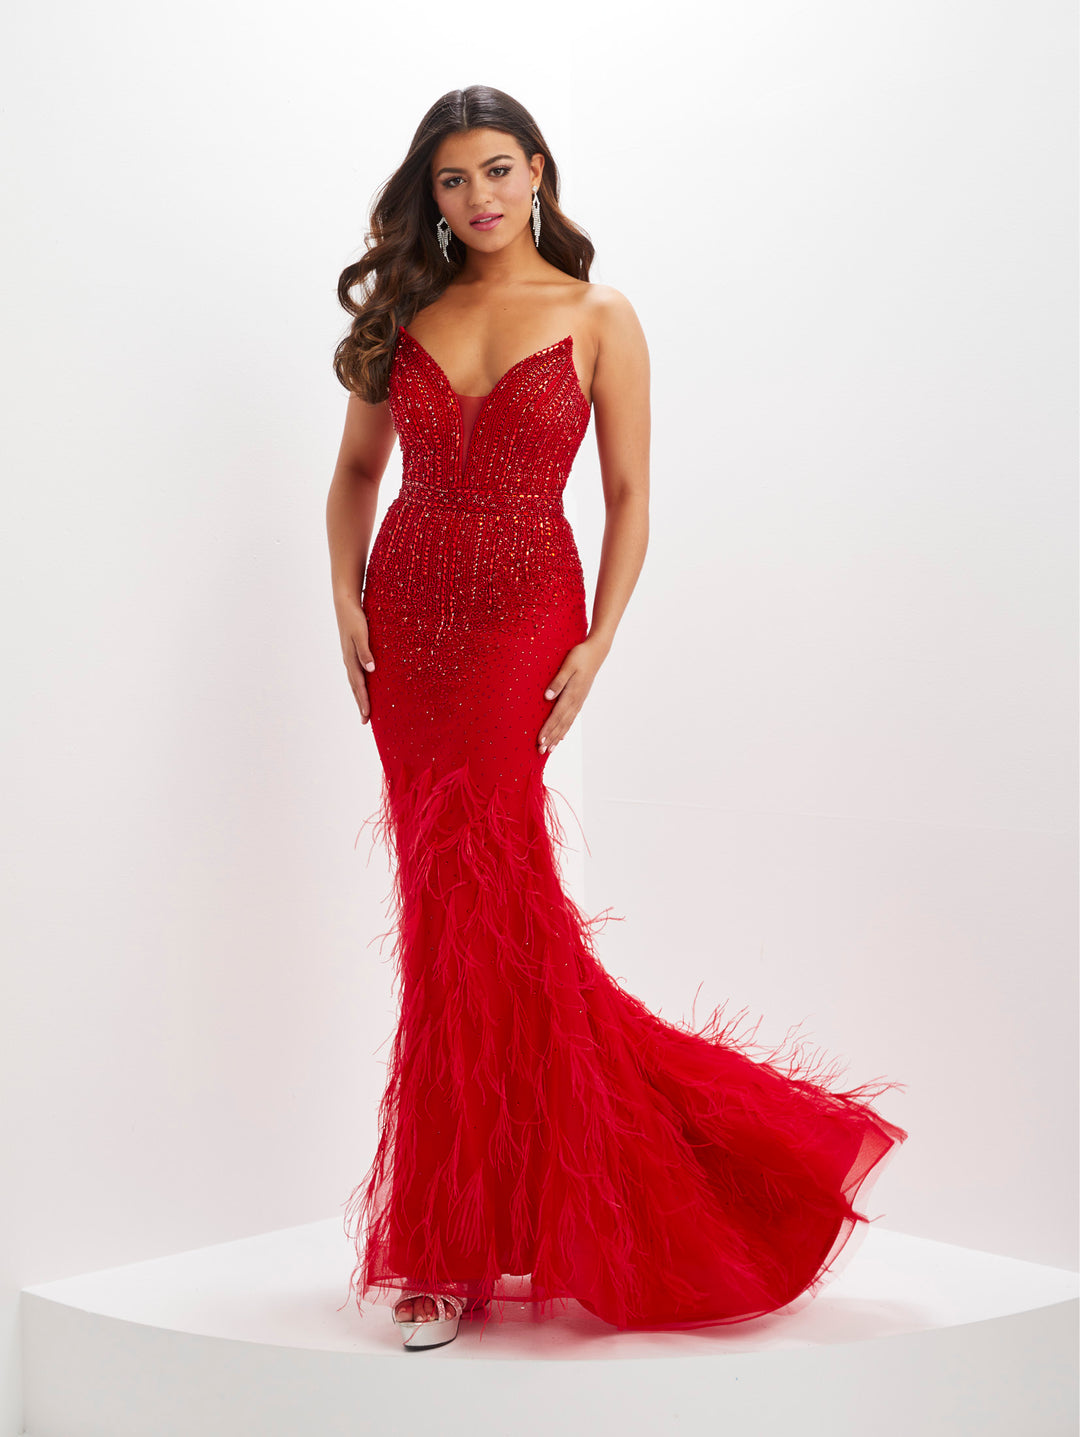 Feather Tulle Sleeveless Mermaid Dress by Panoply 14152